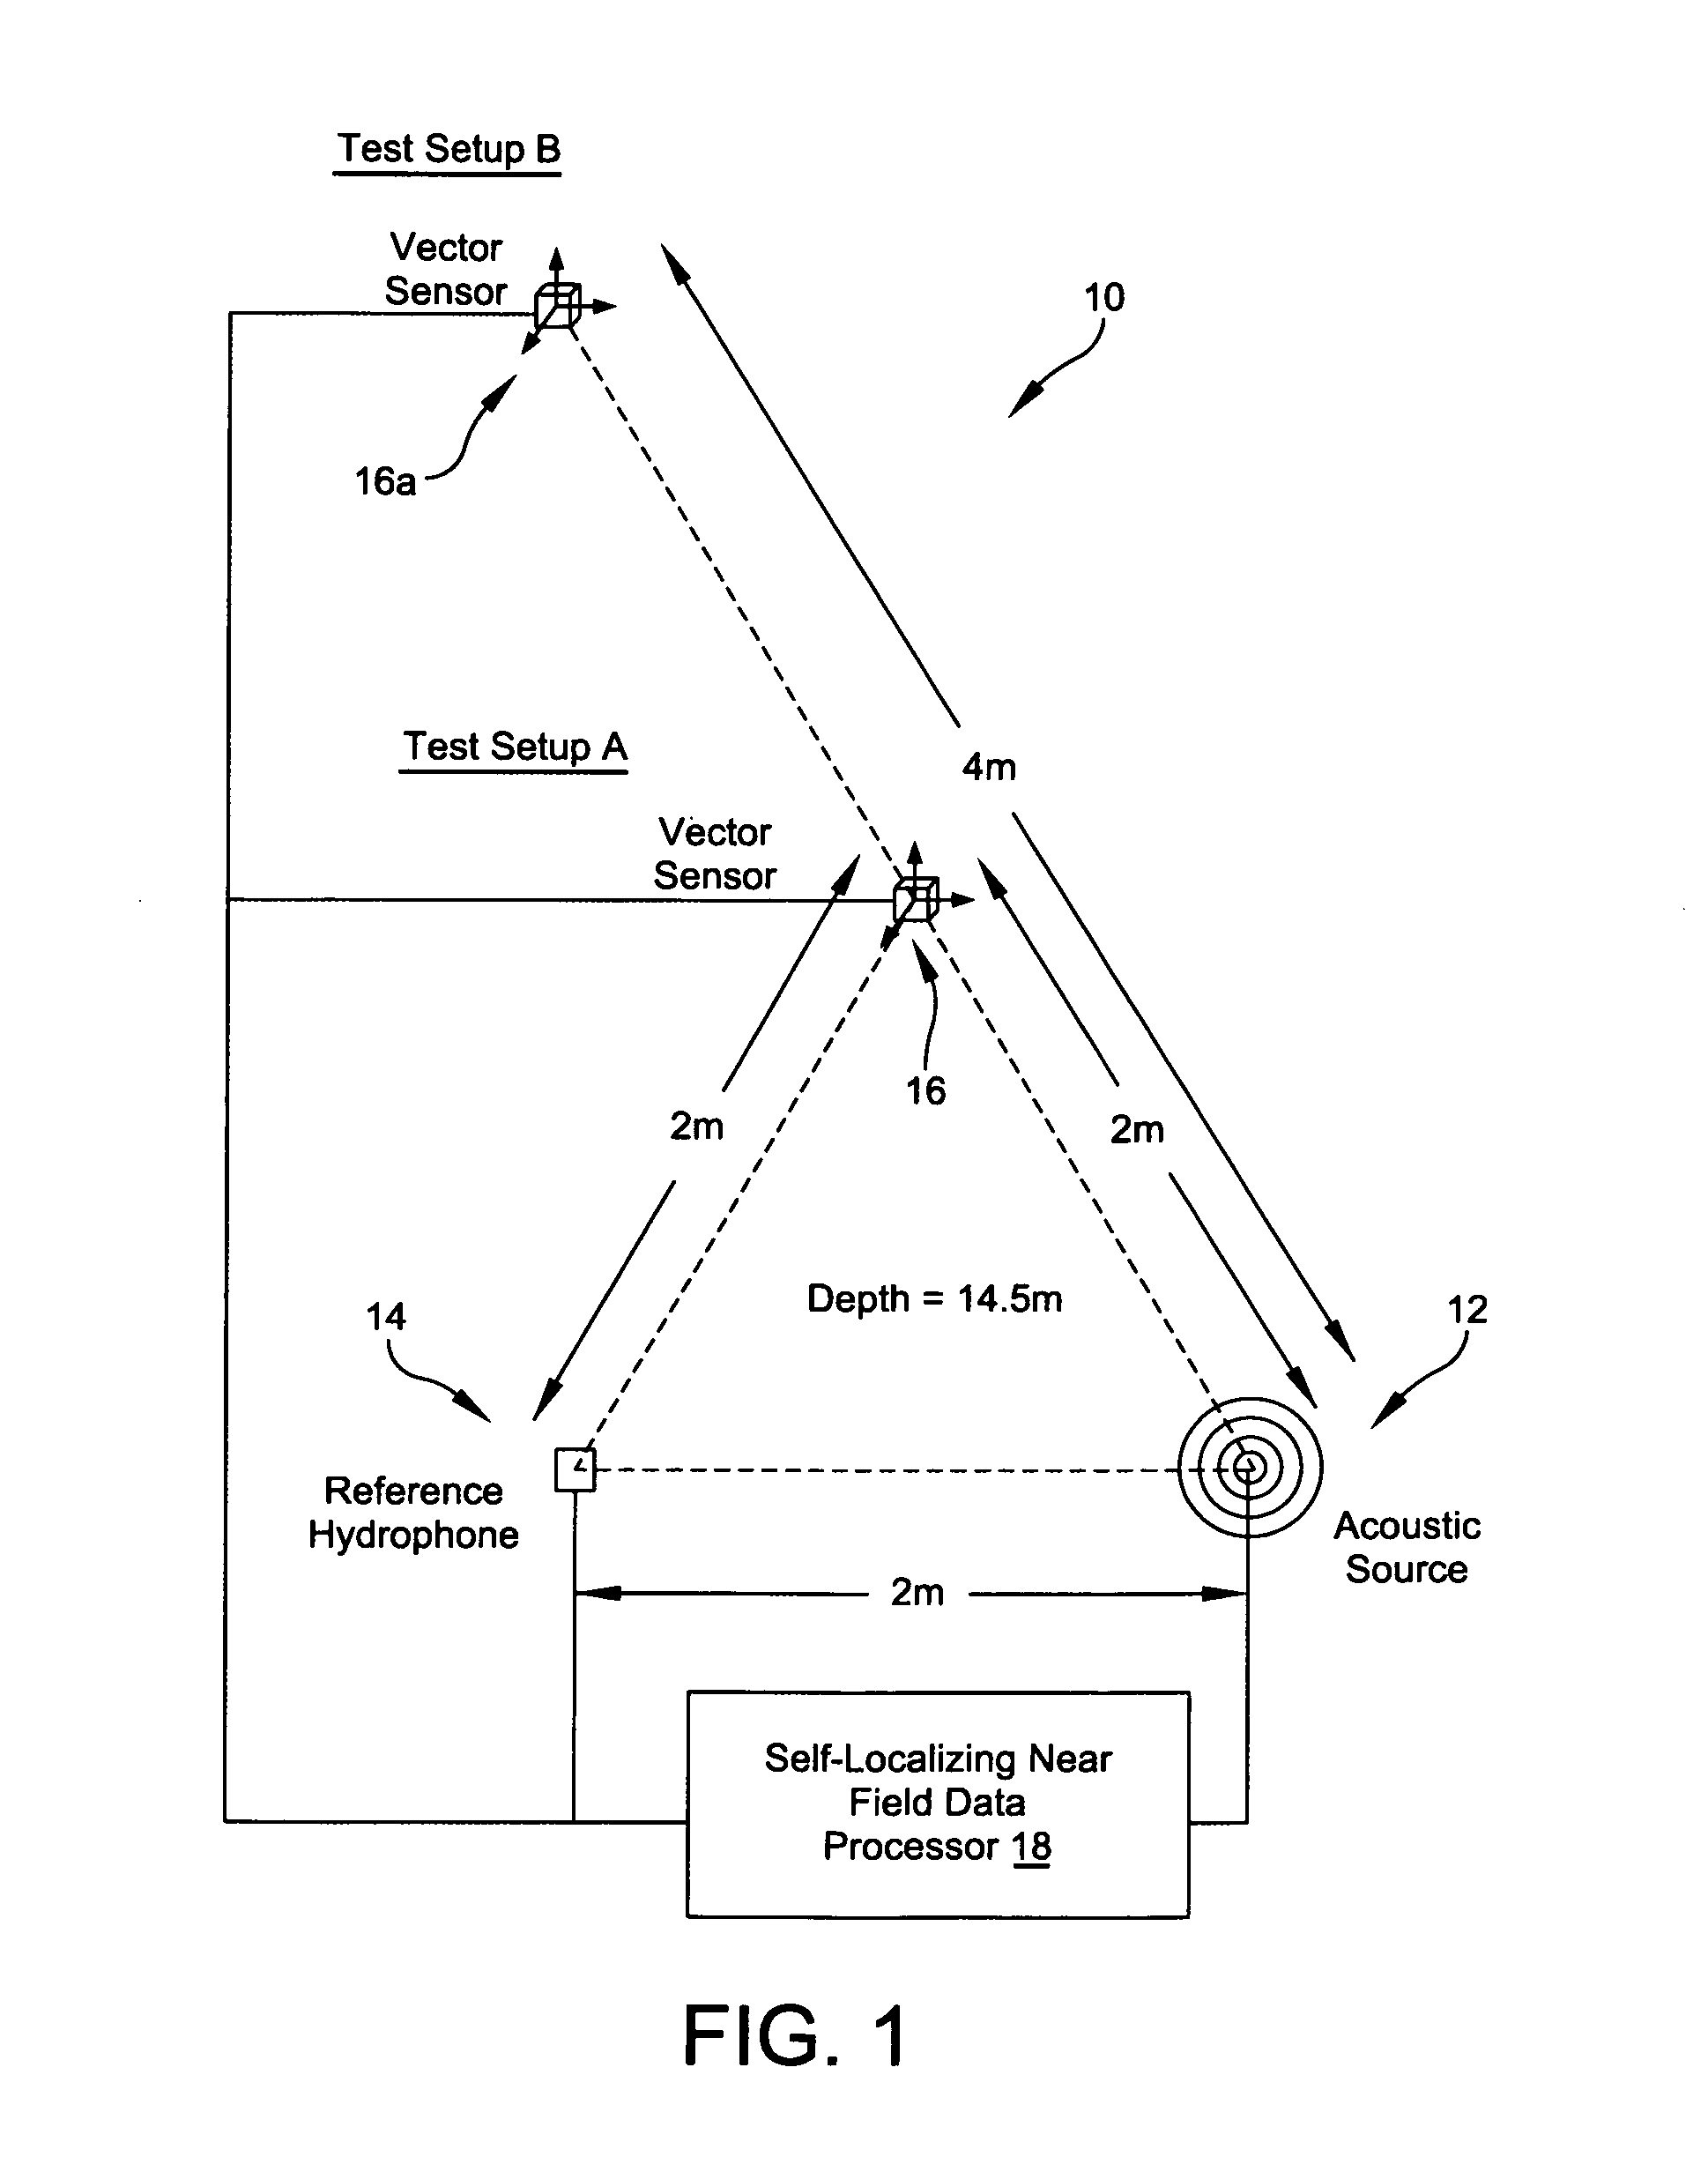 System for self-localizing near field data processing